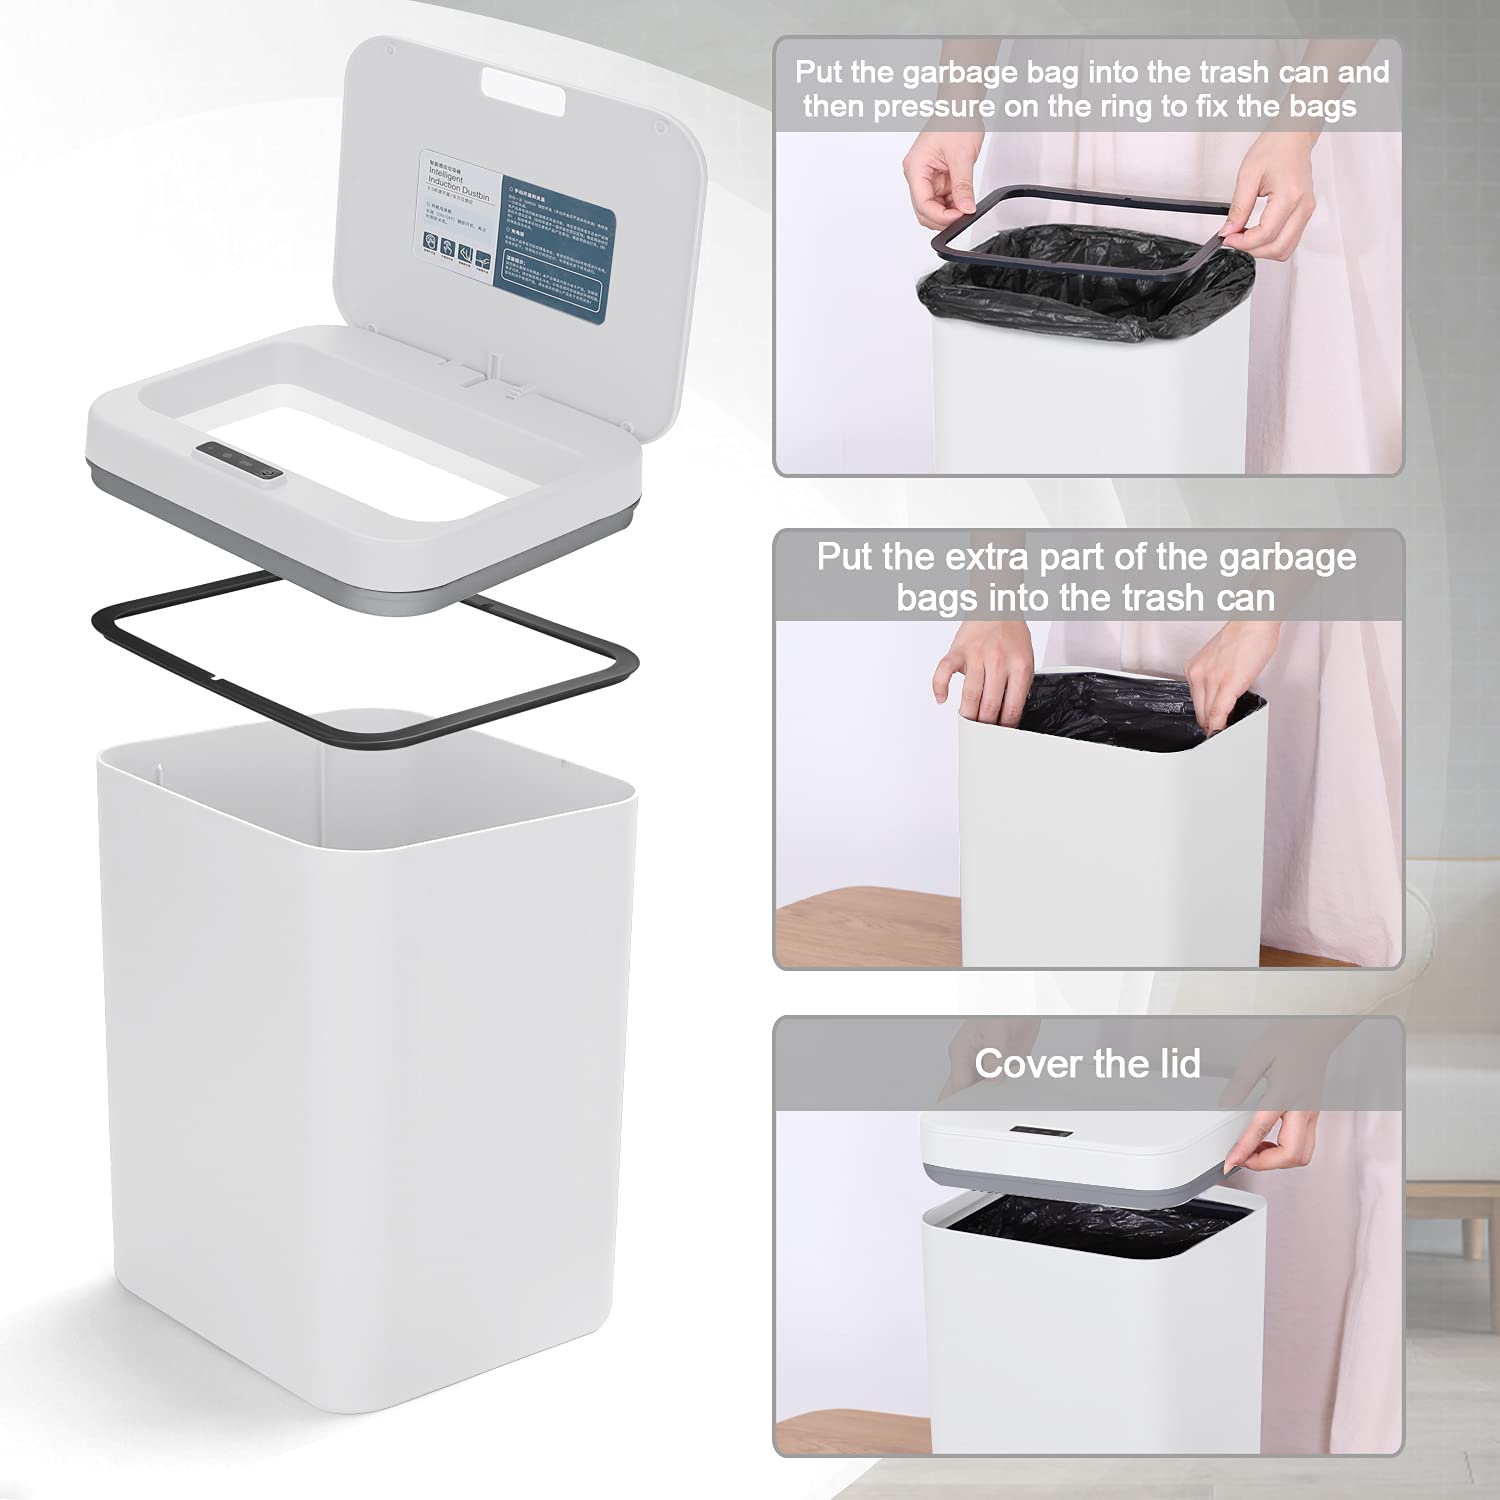 Sensor Trash Can. Top 10 Gift Ideas For 70 Years Old Woman in Birthday - 7